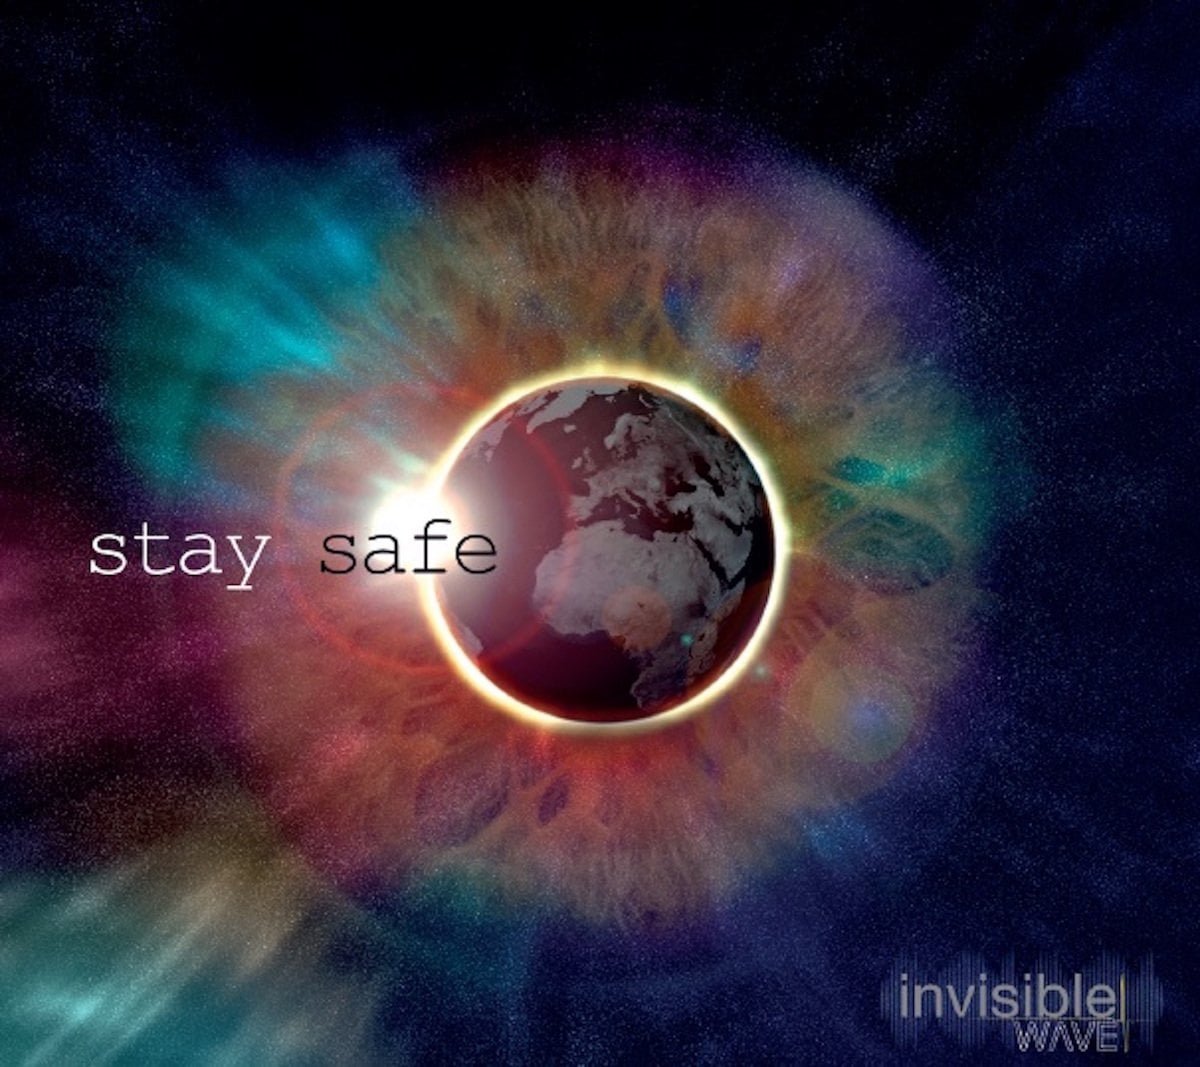 invisible-wave-stay-safe